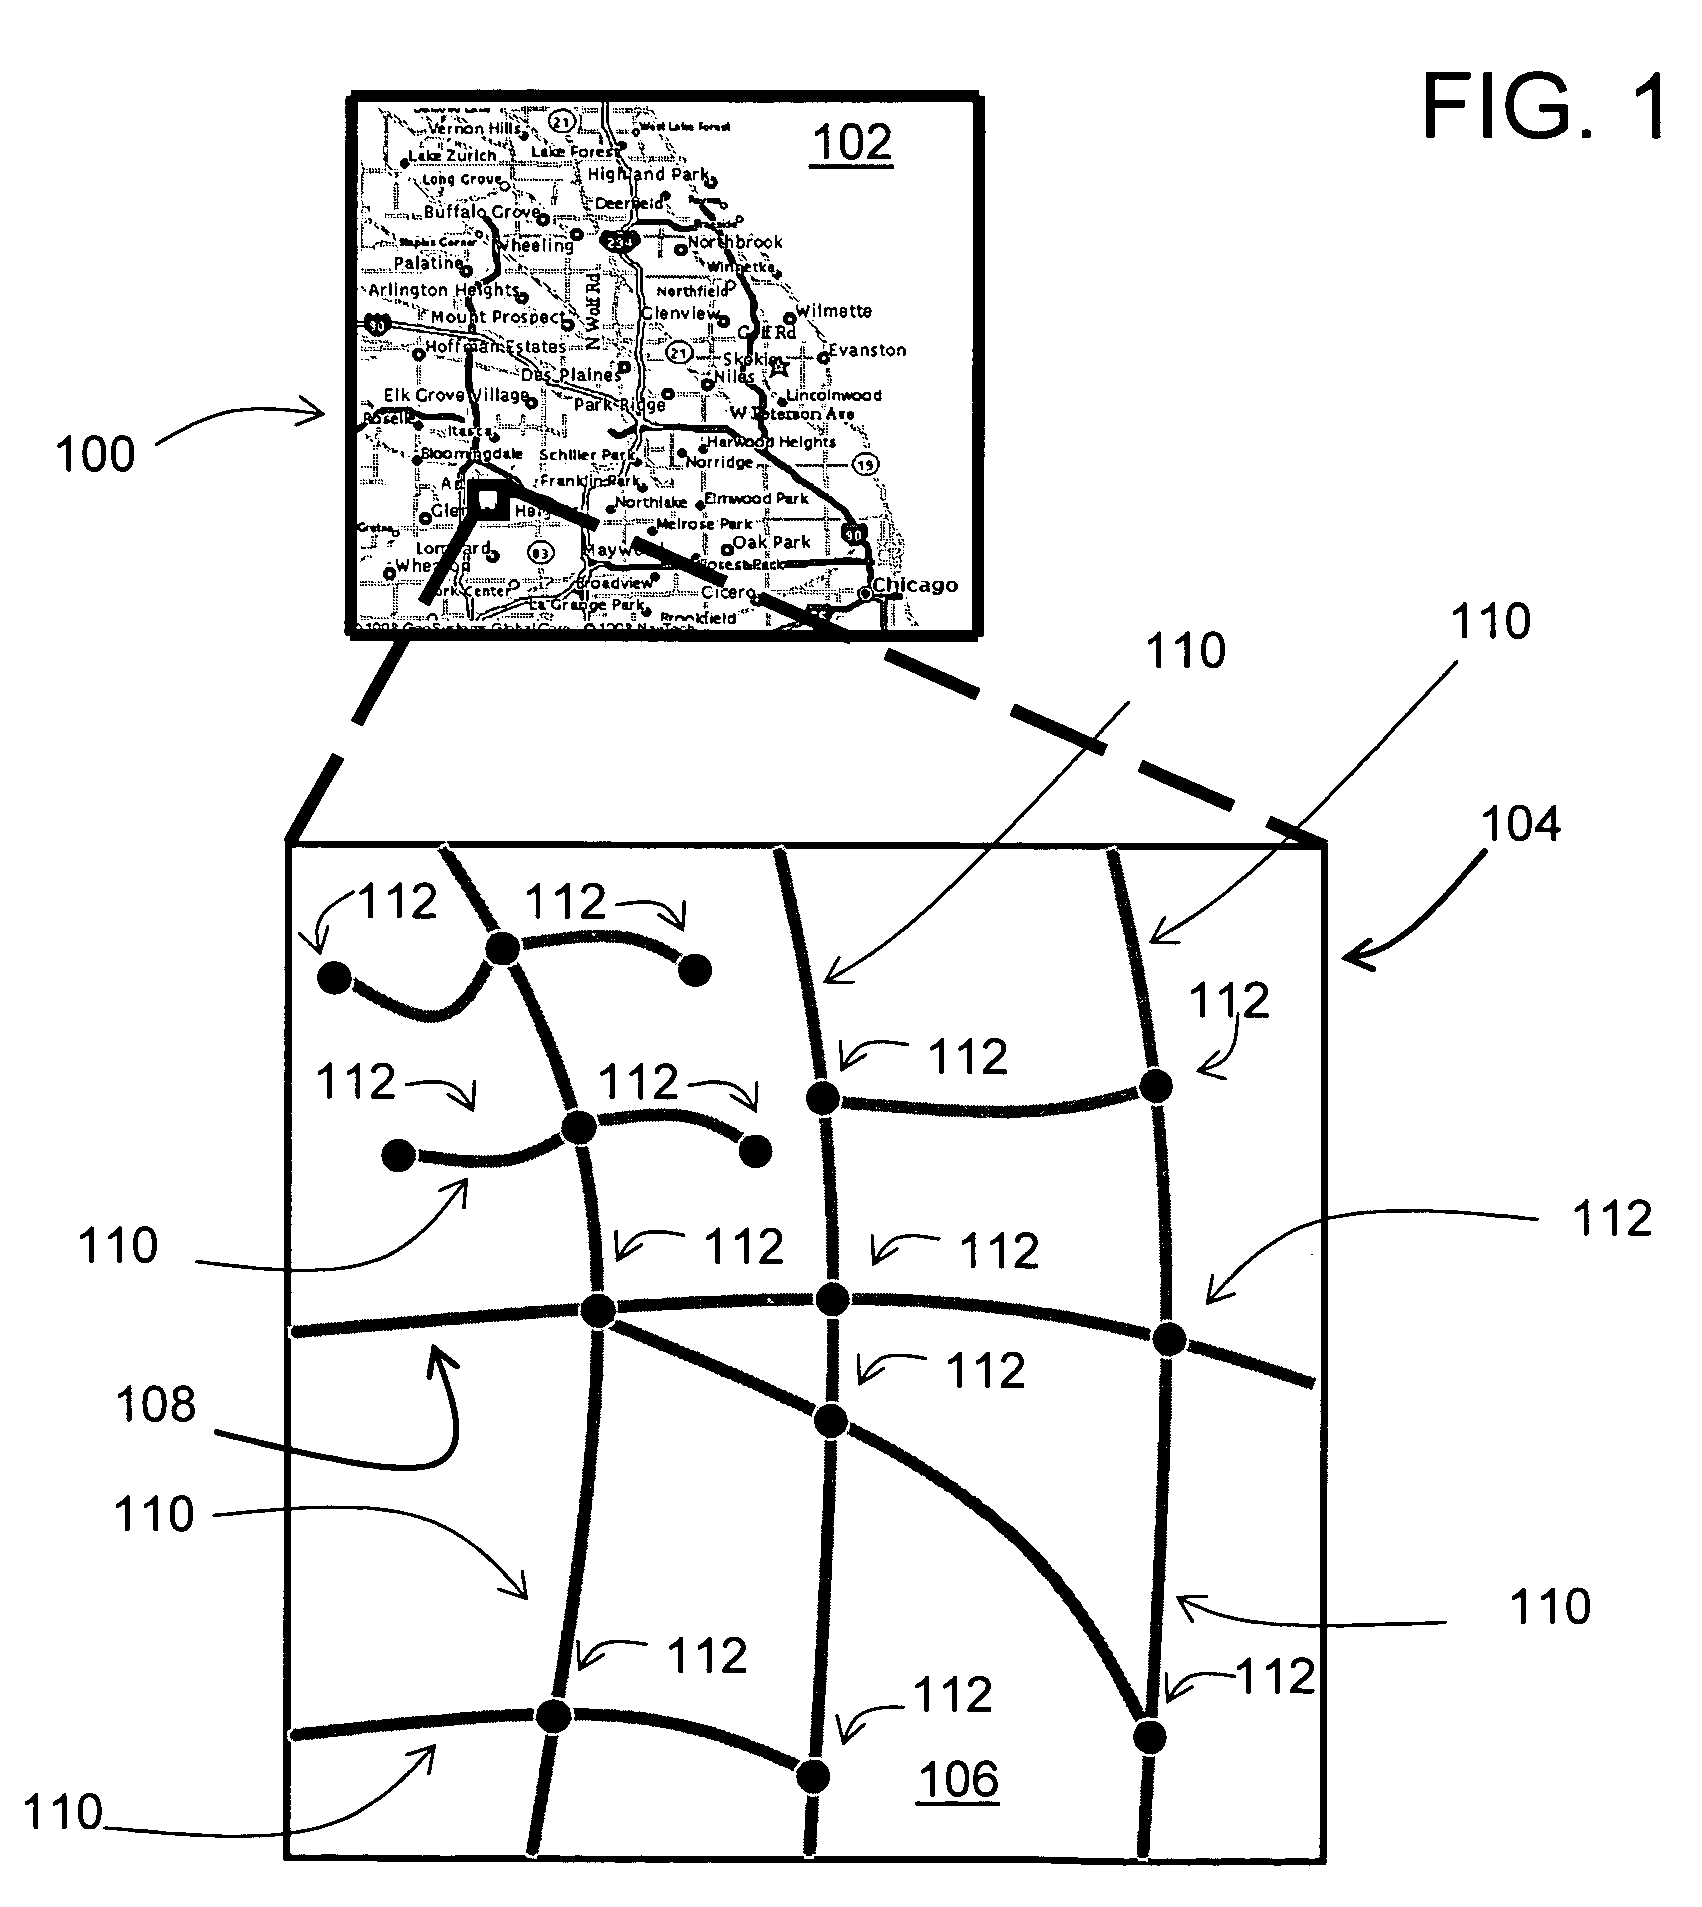 Method of collecting parking availability information for a geographic database for use with a navigation system